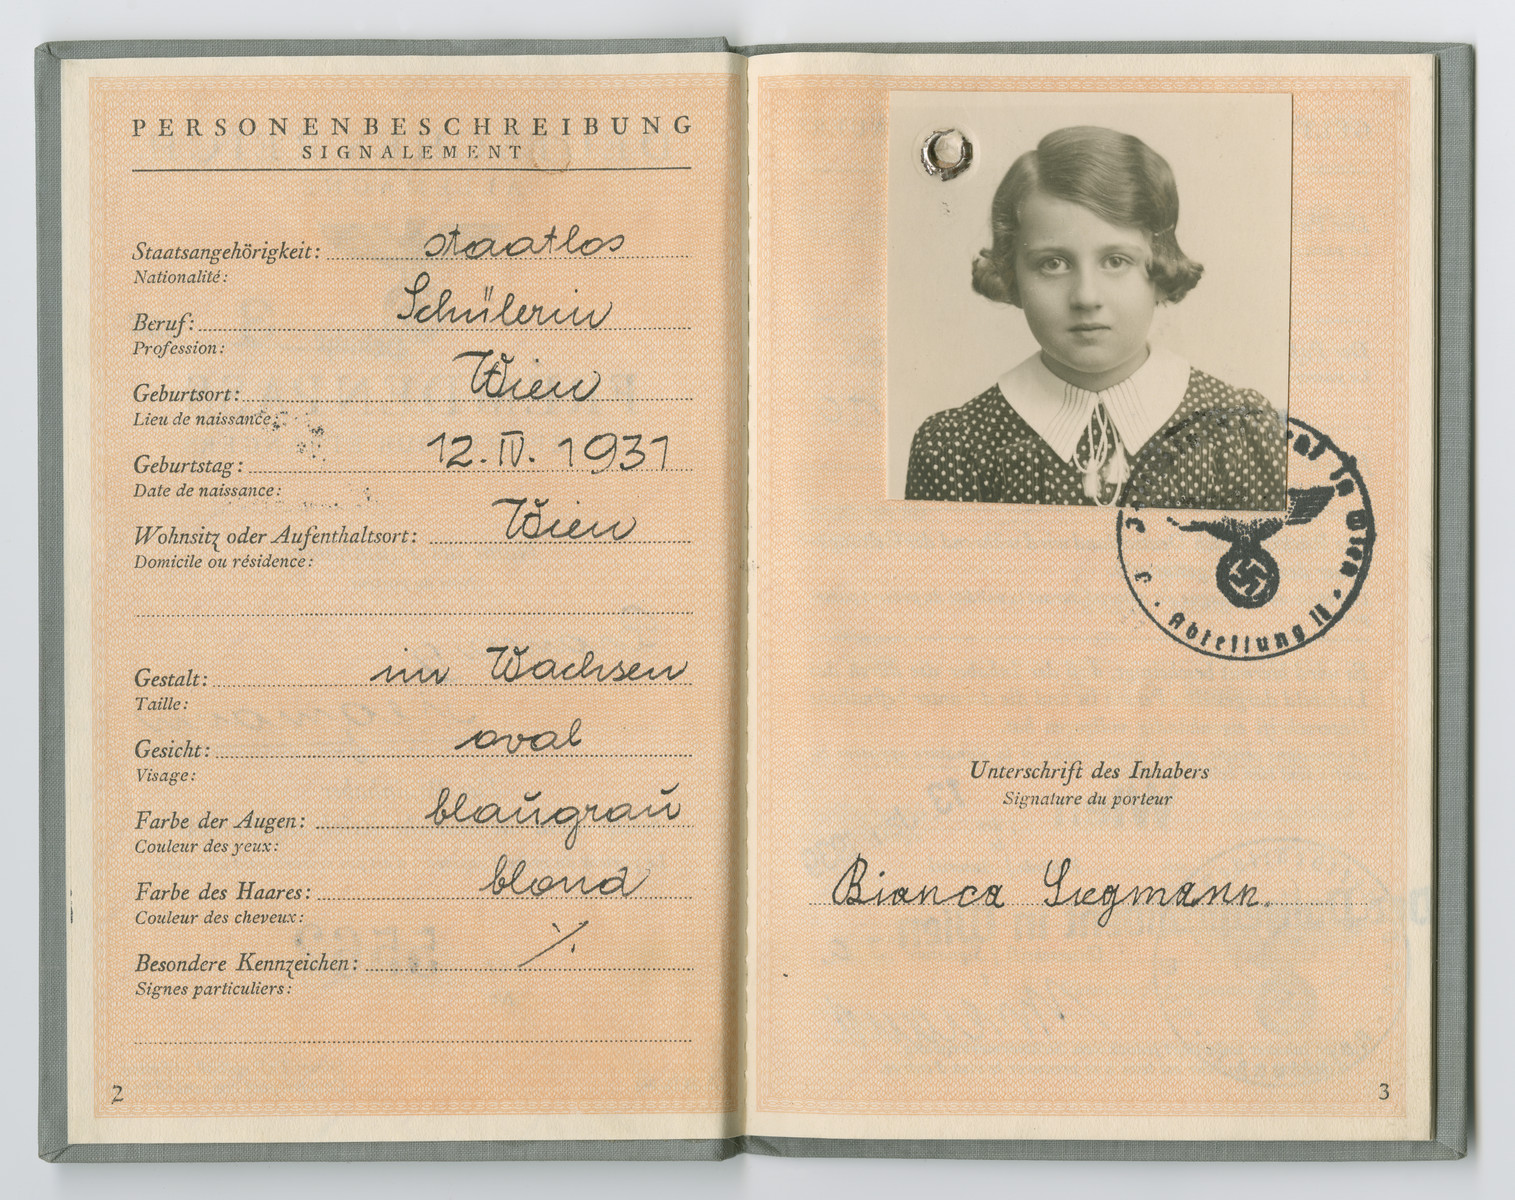 Identification papers issued to Bianca Siegmann stating she was born in Vienna on April 12, 1931 but is officially stateless.